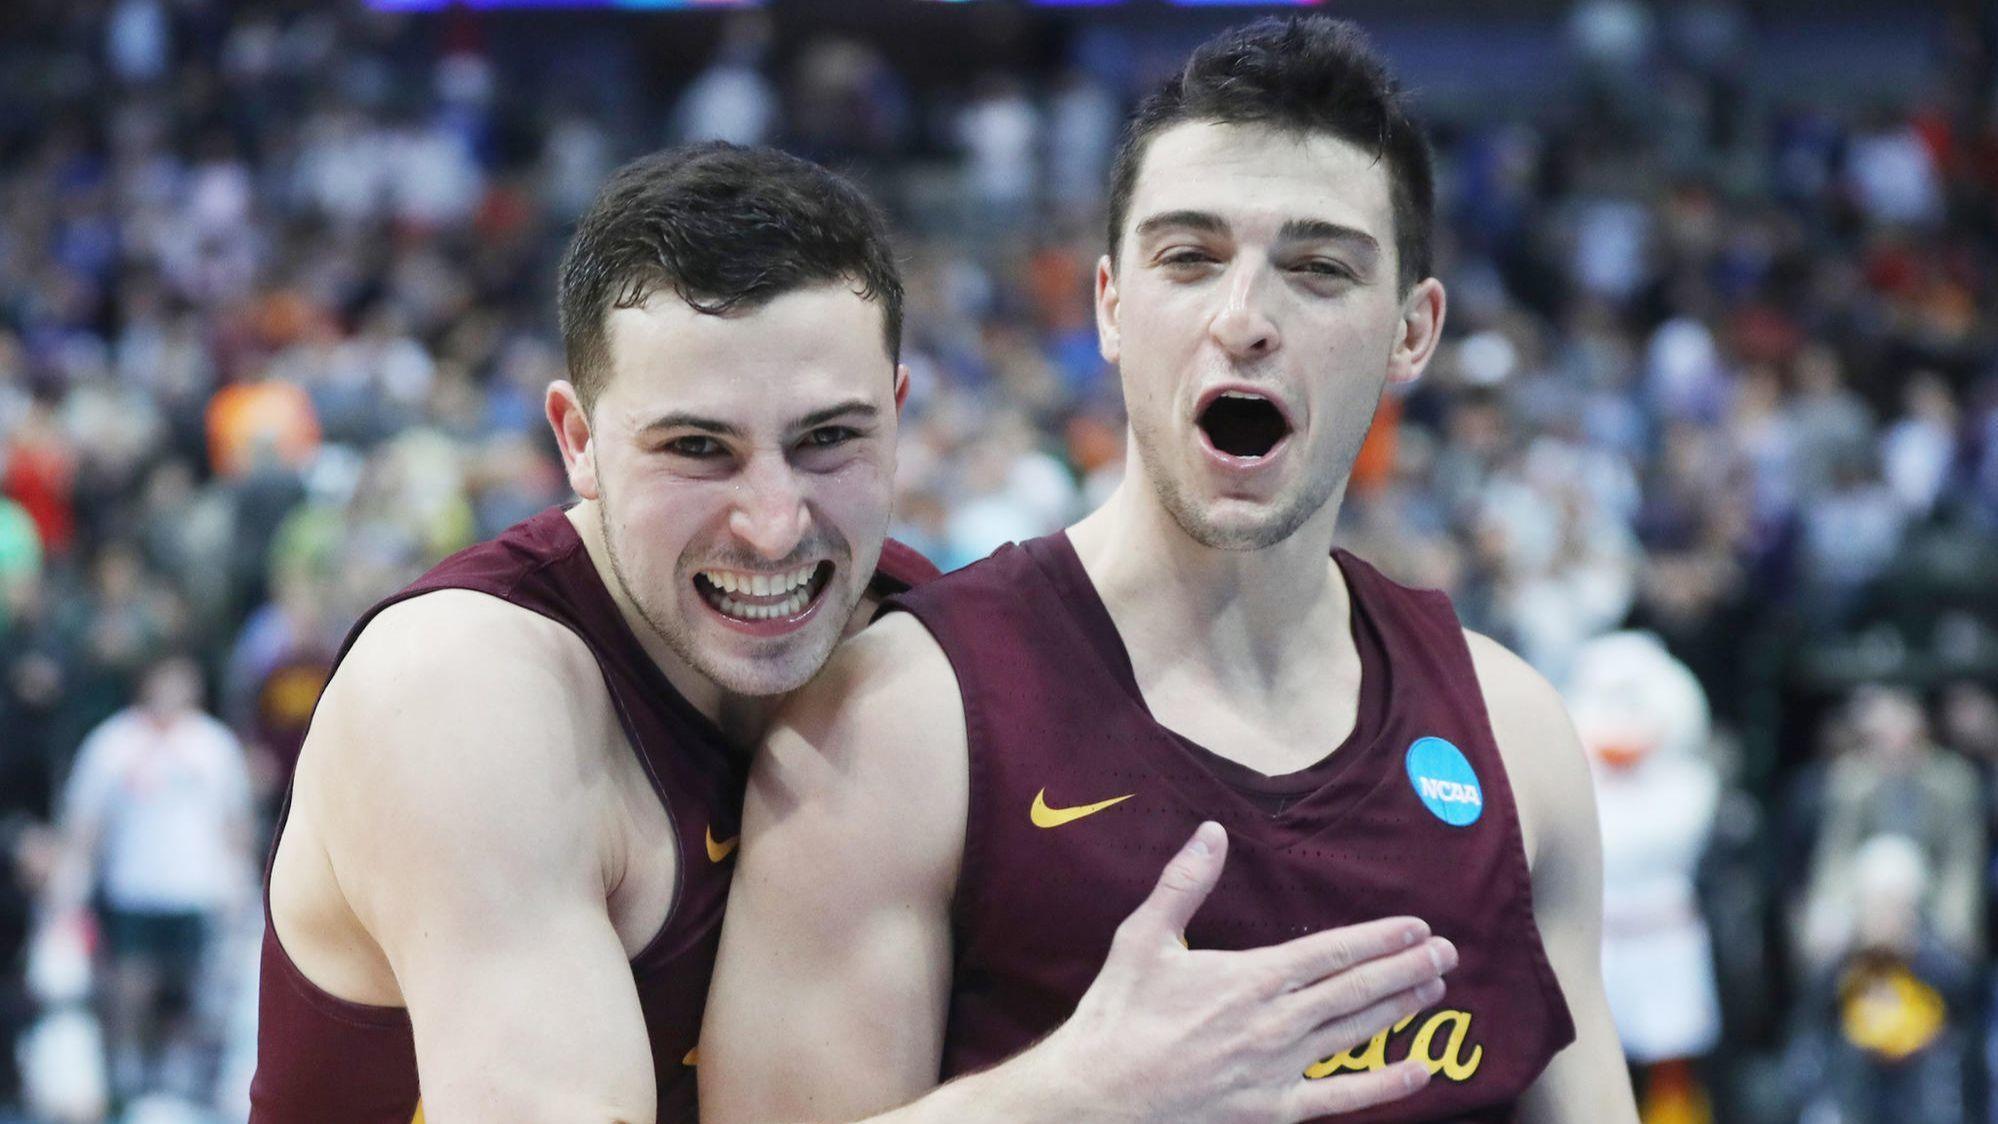 Teammates since third grade, Loyola's Ben Richardson and Clayton Custer have 'mind-blowing' connection on court